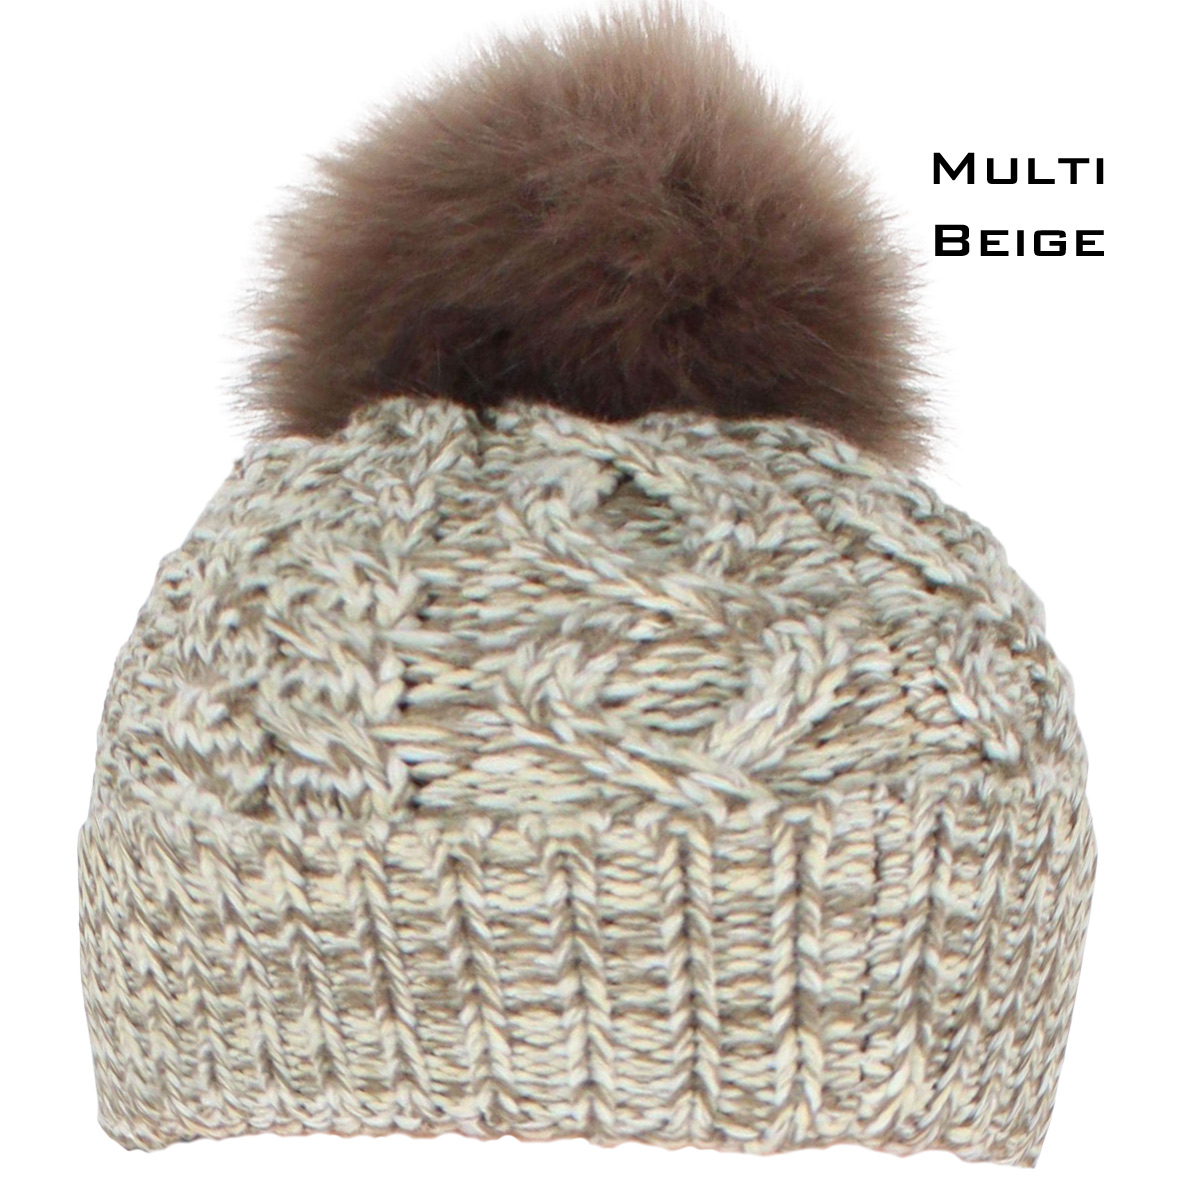 3114 - Winter Knit Hats 10026 TAUPE/FUR POM POM Knit Winter Hat - One Size Fits Most